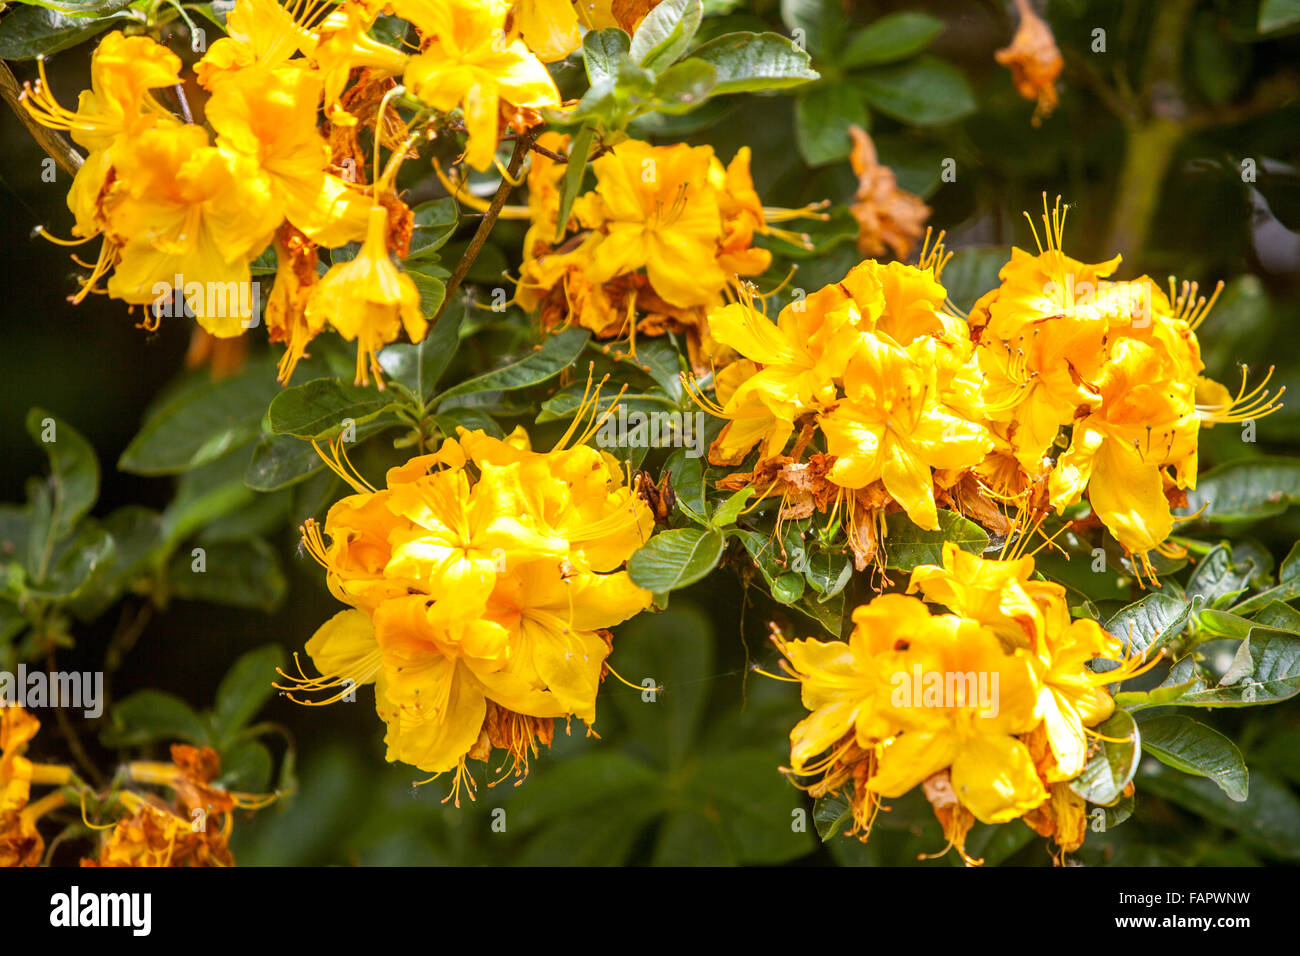 Rhododendron luteum yellow blooming shrub in garden Stock Photo